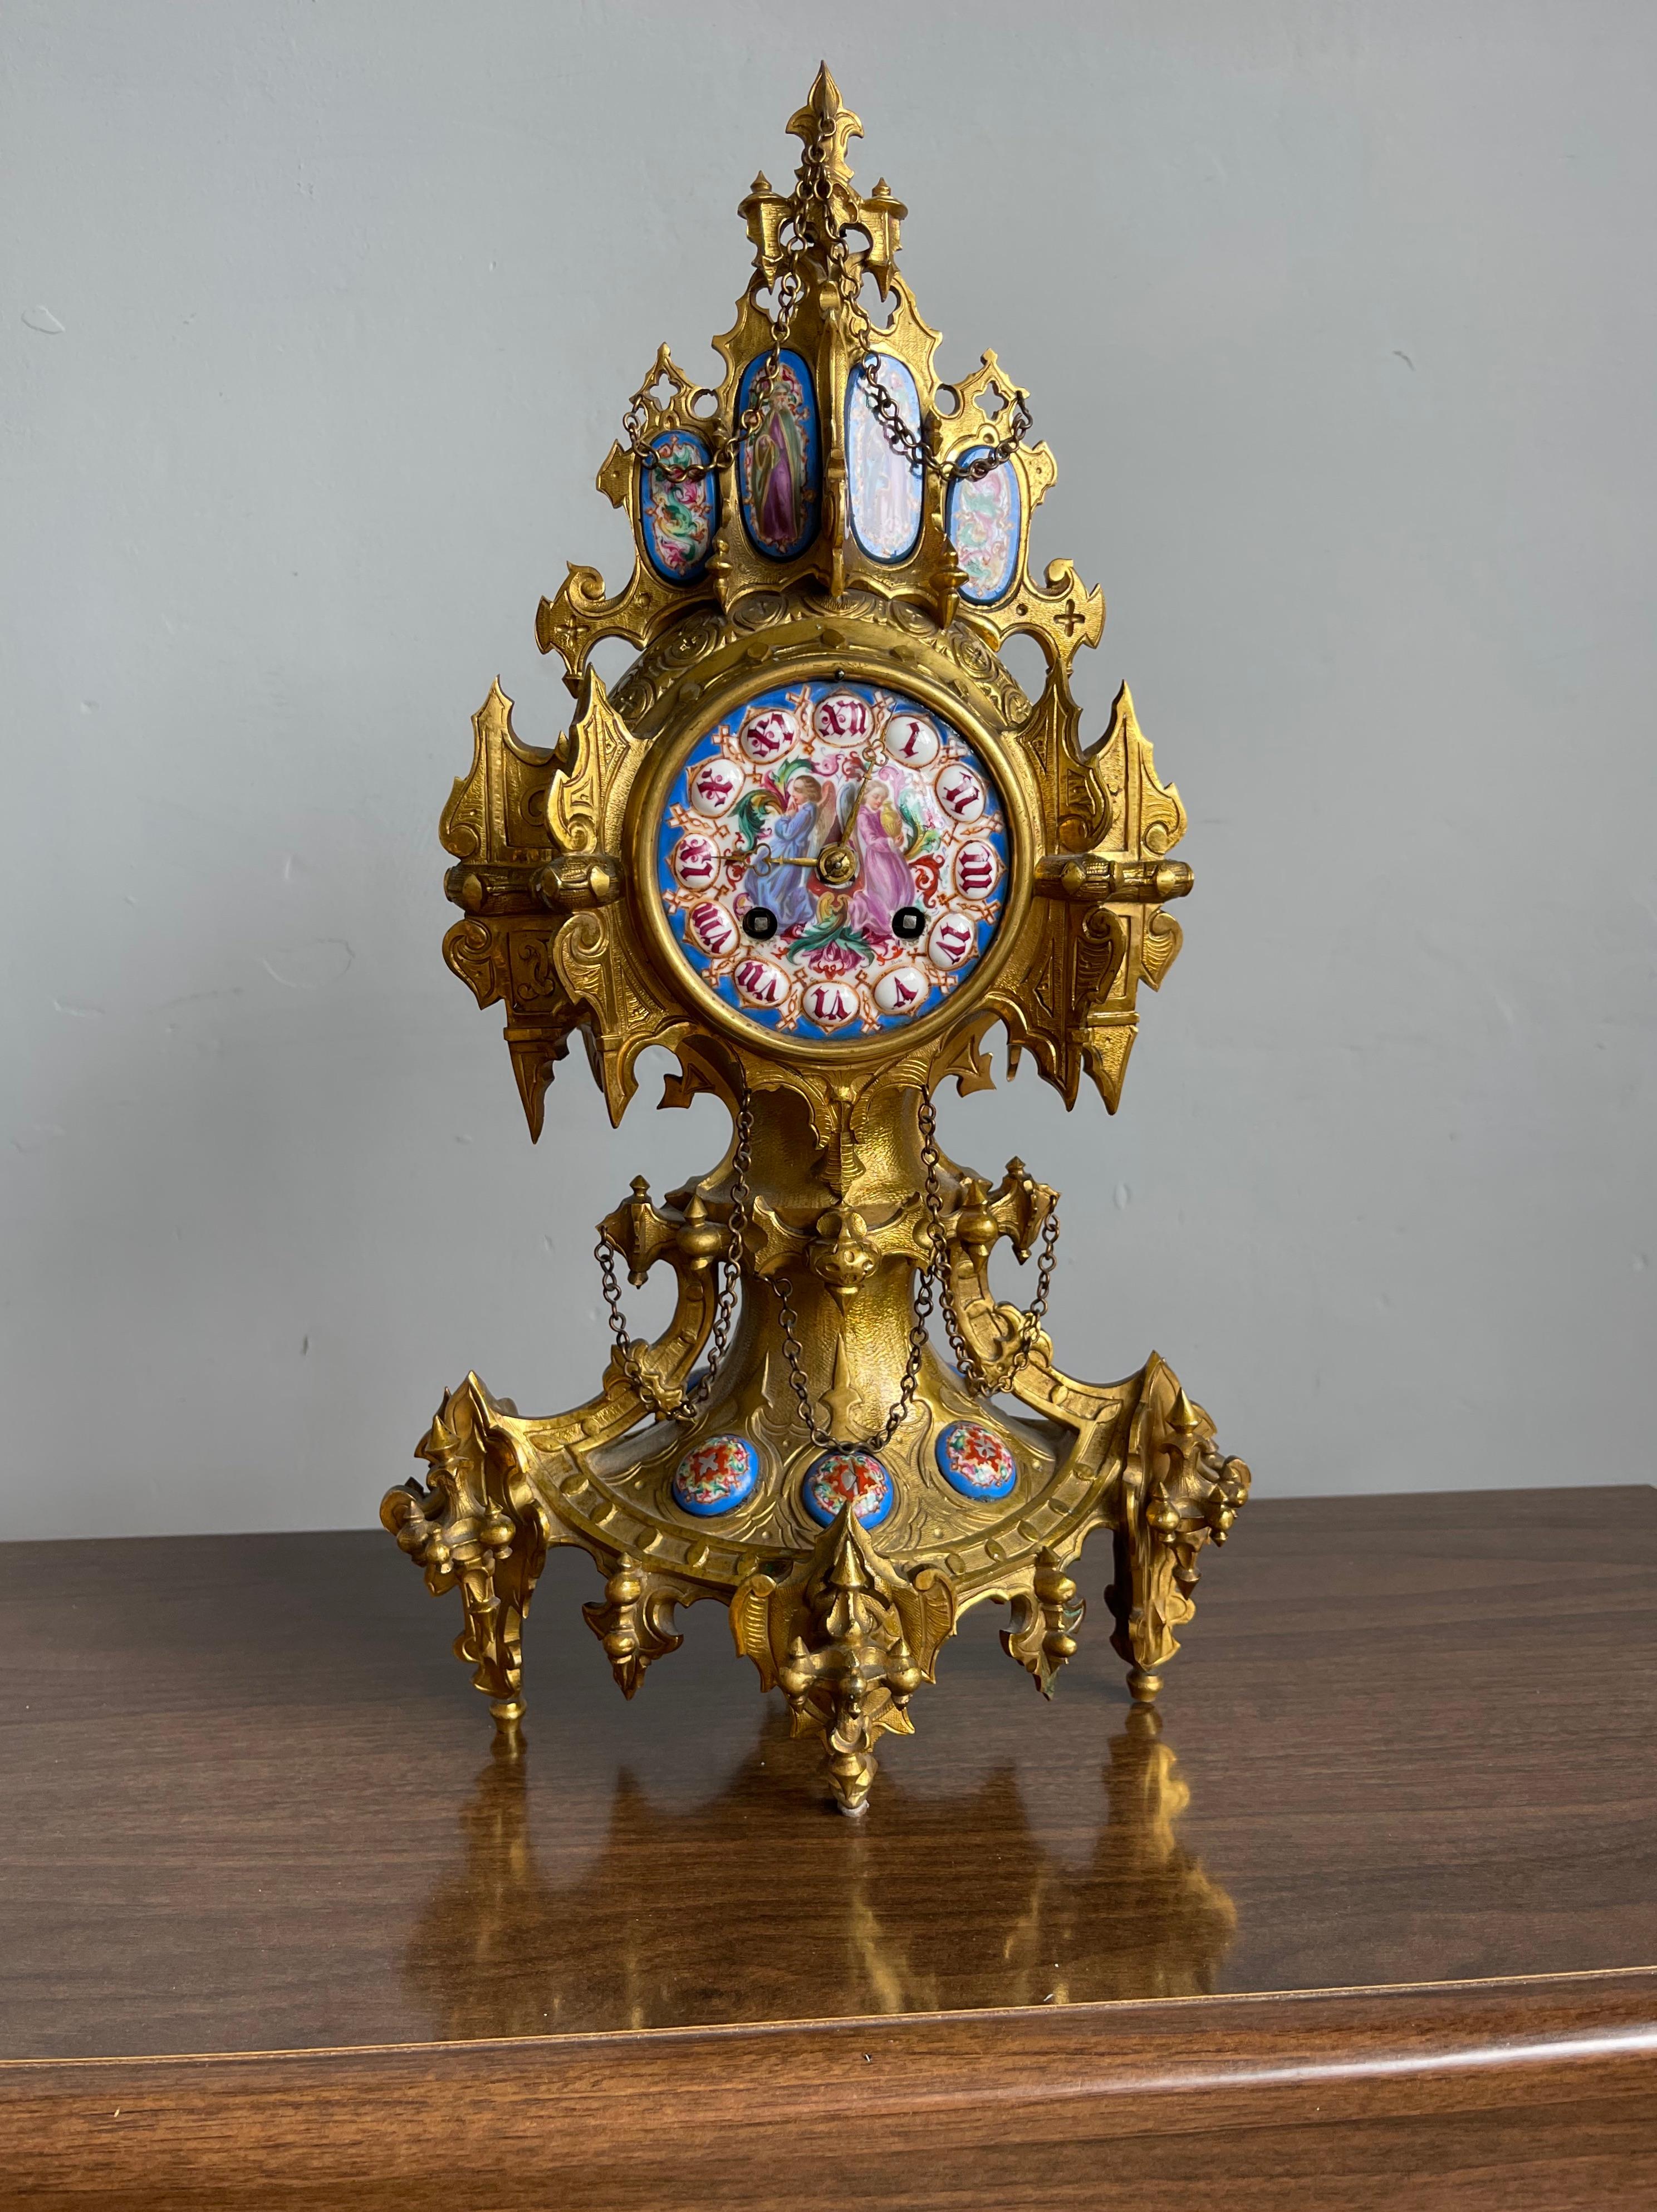 Wonderful clock for the collectors of truly stylish Gothic antiques, by W.H.Tooke, Paris.

Finding this unique (Germany made) Gothic table clock again felt like a blessing. The overall design is remarkable, but the combination of the craftsmanship